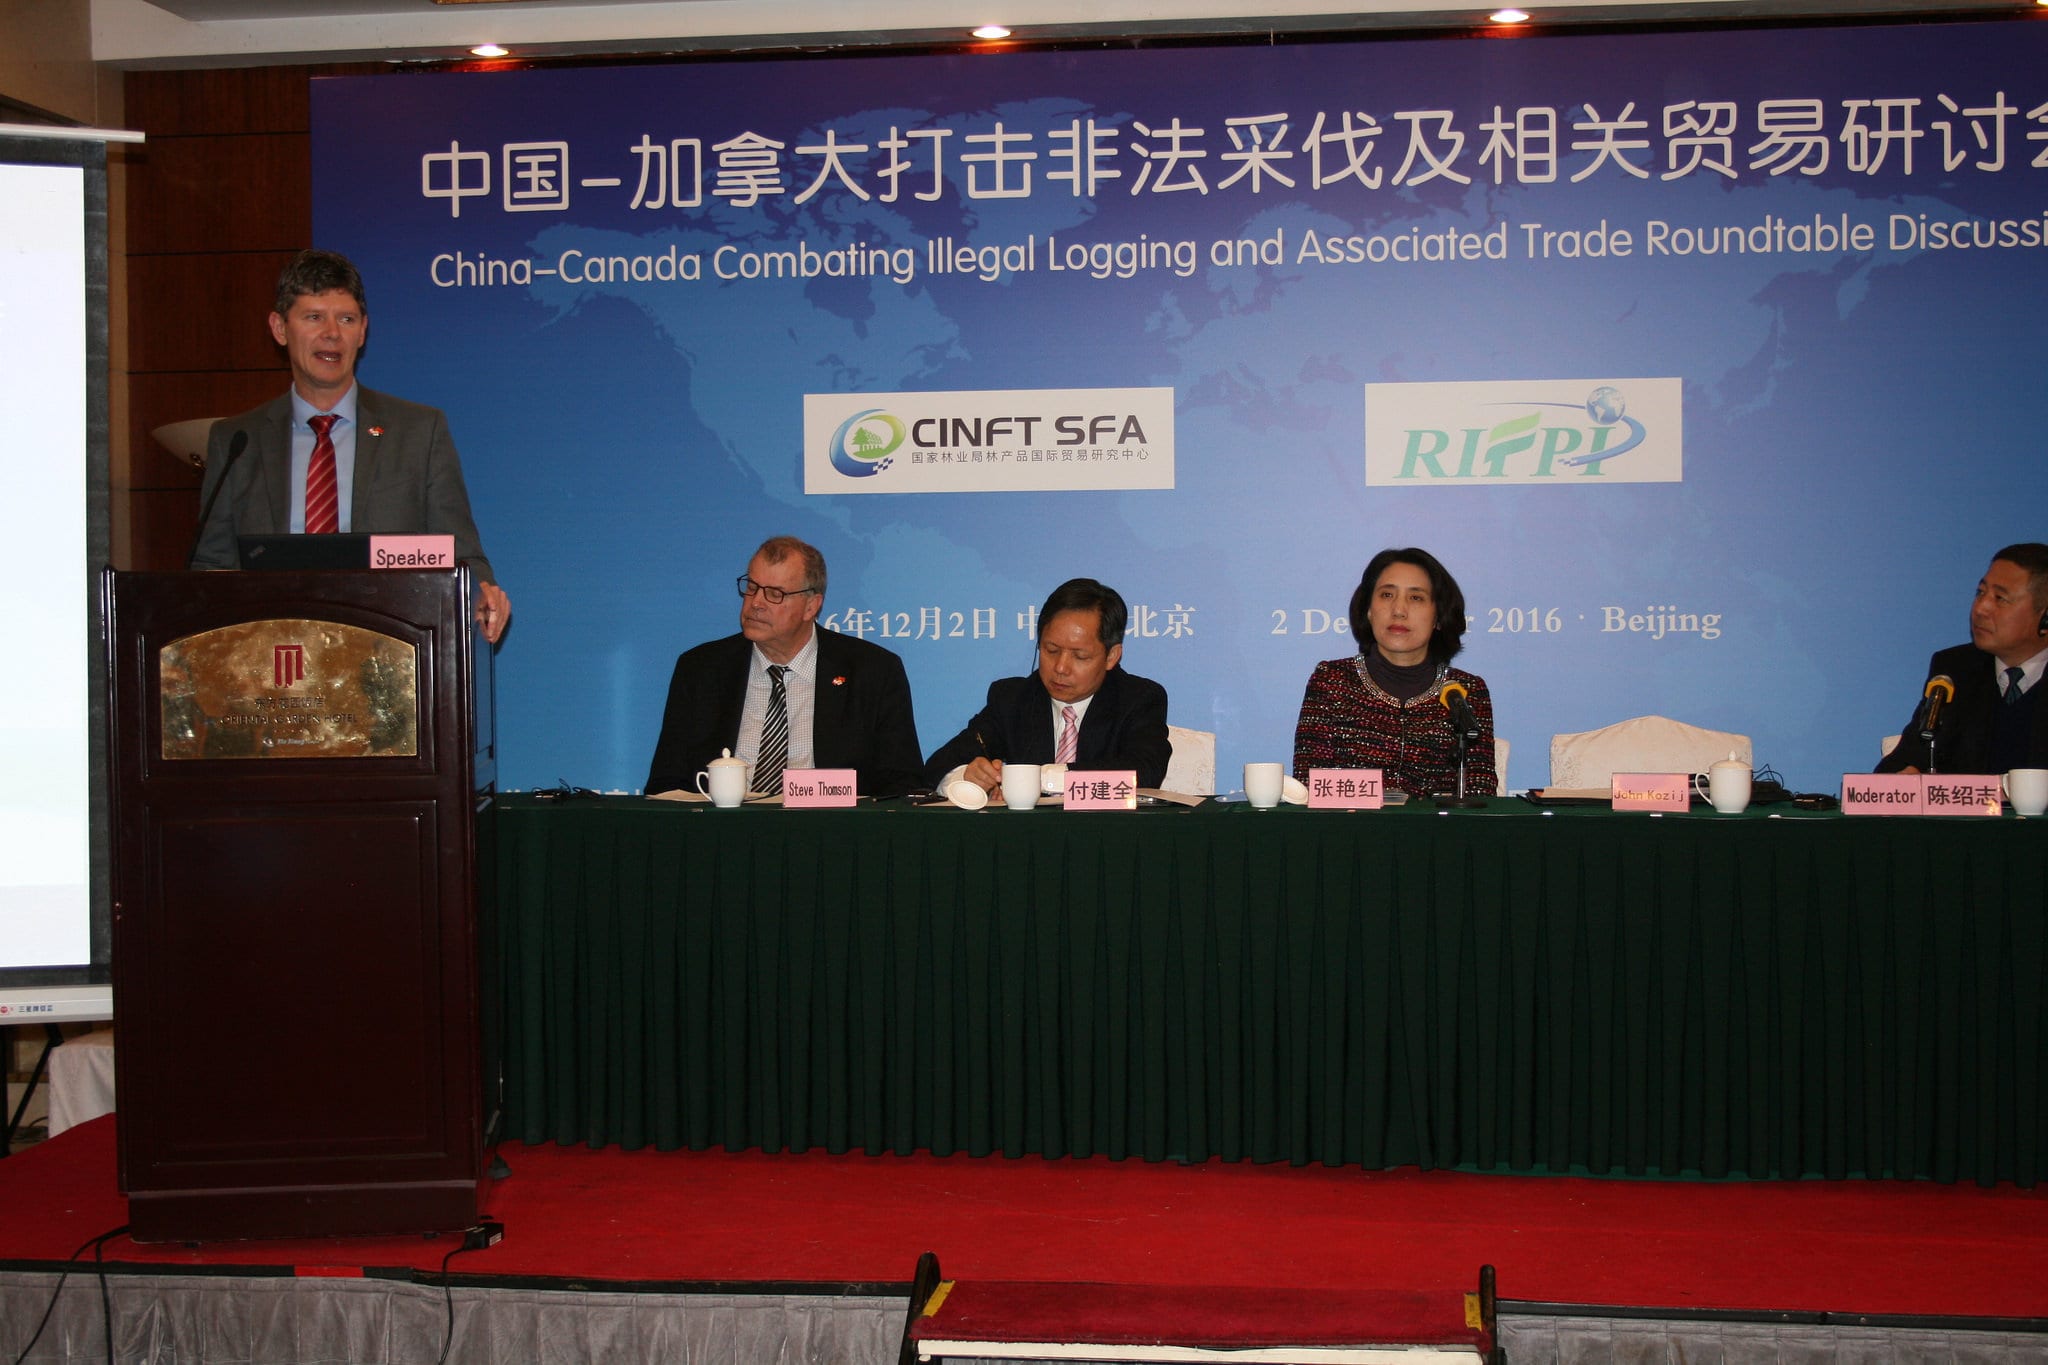 China-Canada Roundtable on Illegal Logging